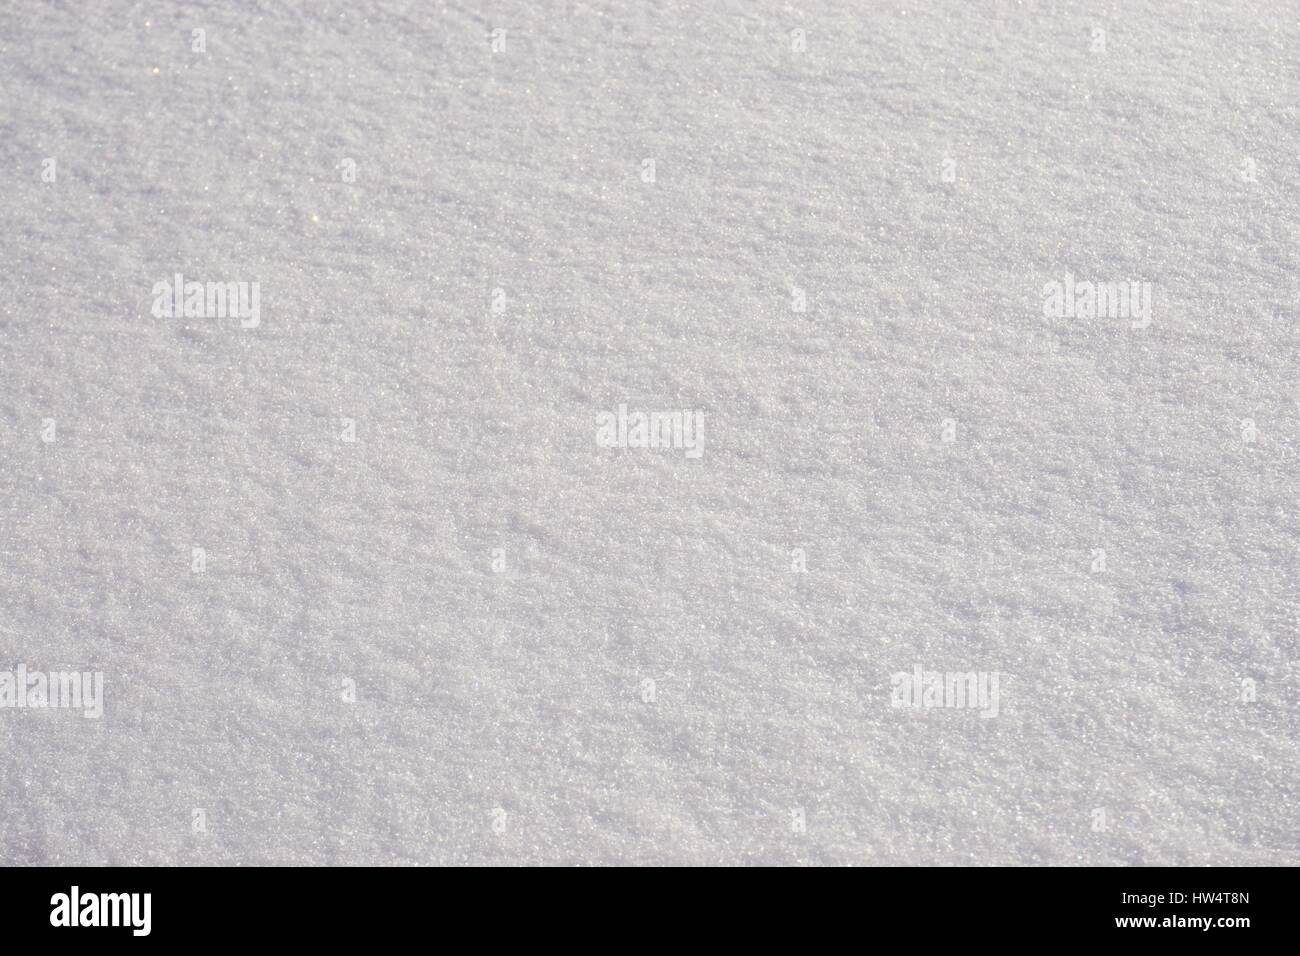 Glistening white snow after a winter storm Stock Photo